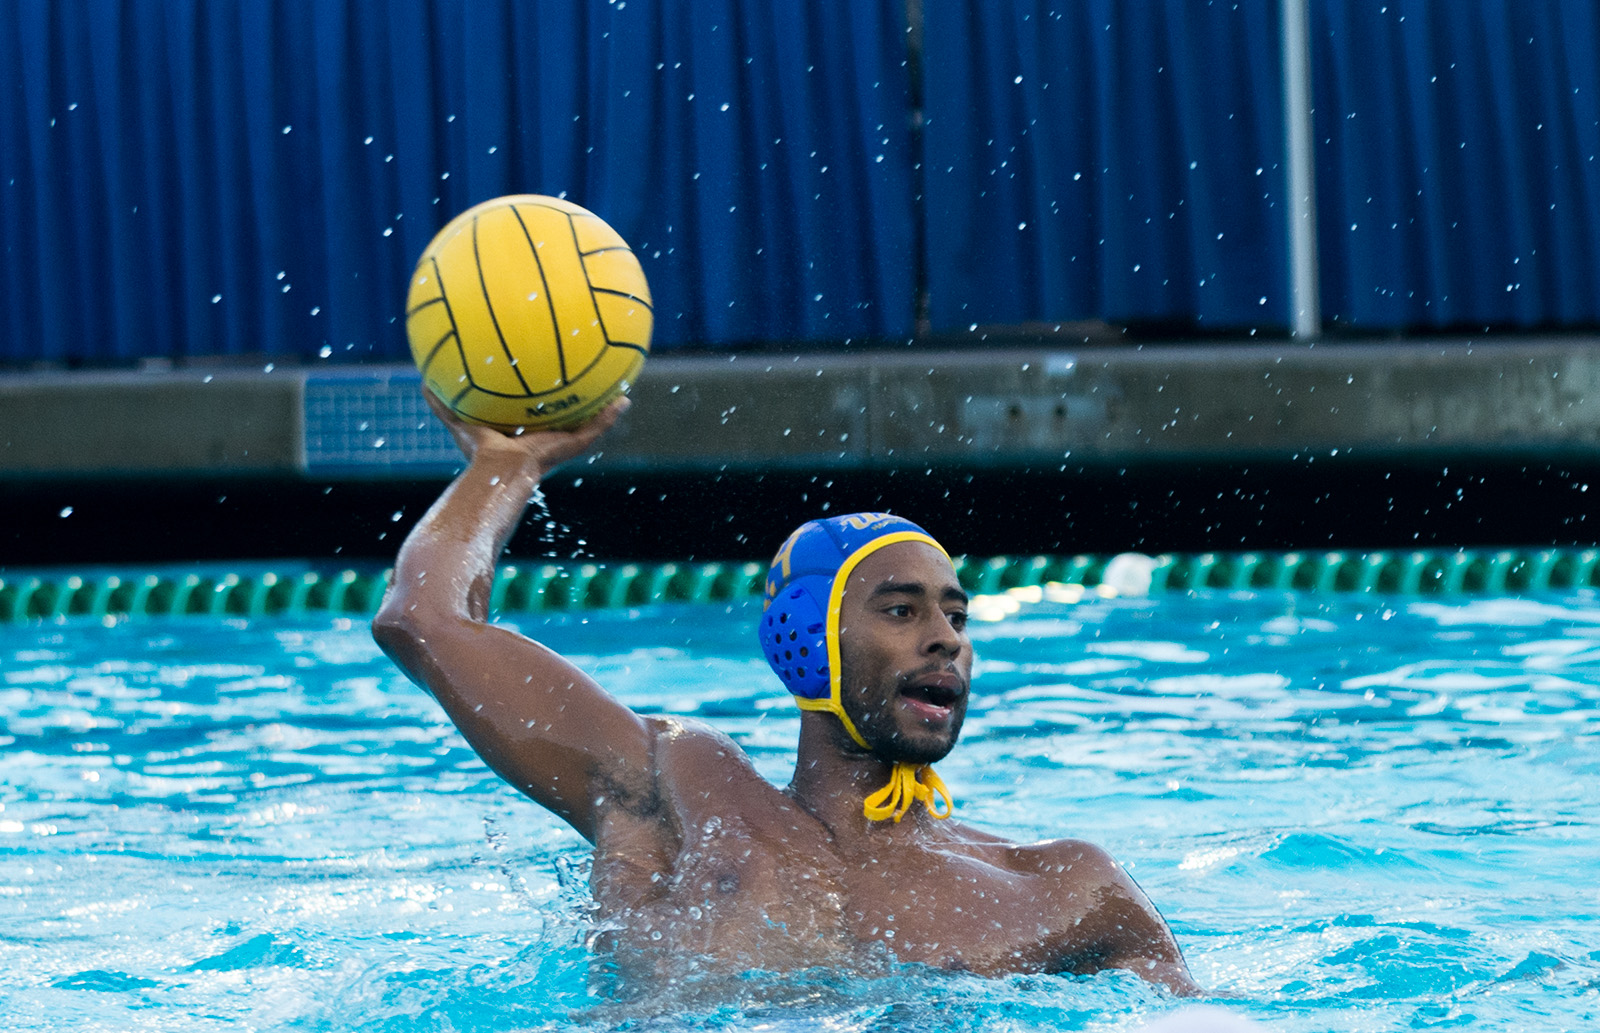 Men’s water polo sinks to Stanford 7-5, comes back 14-6 against SJSU ...